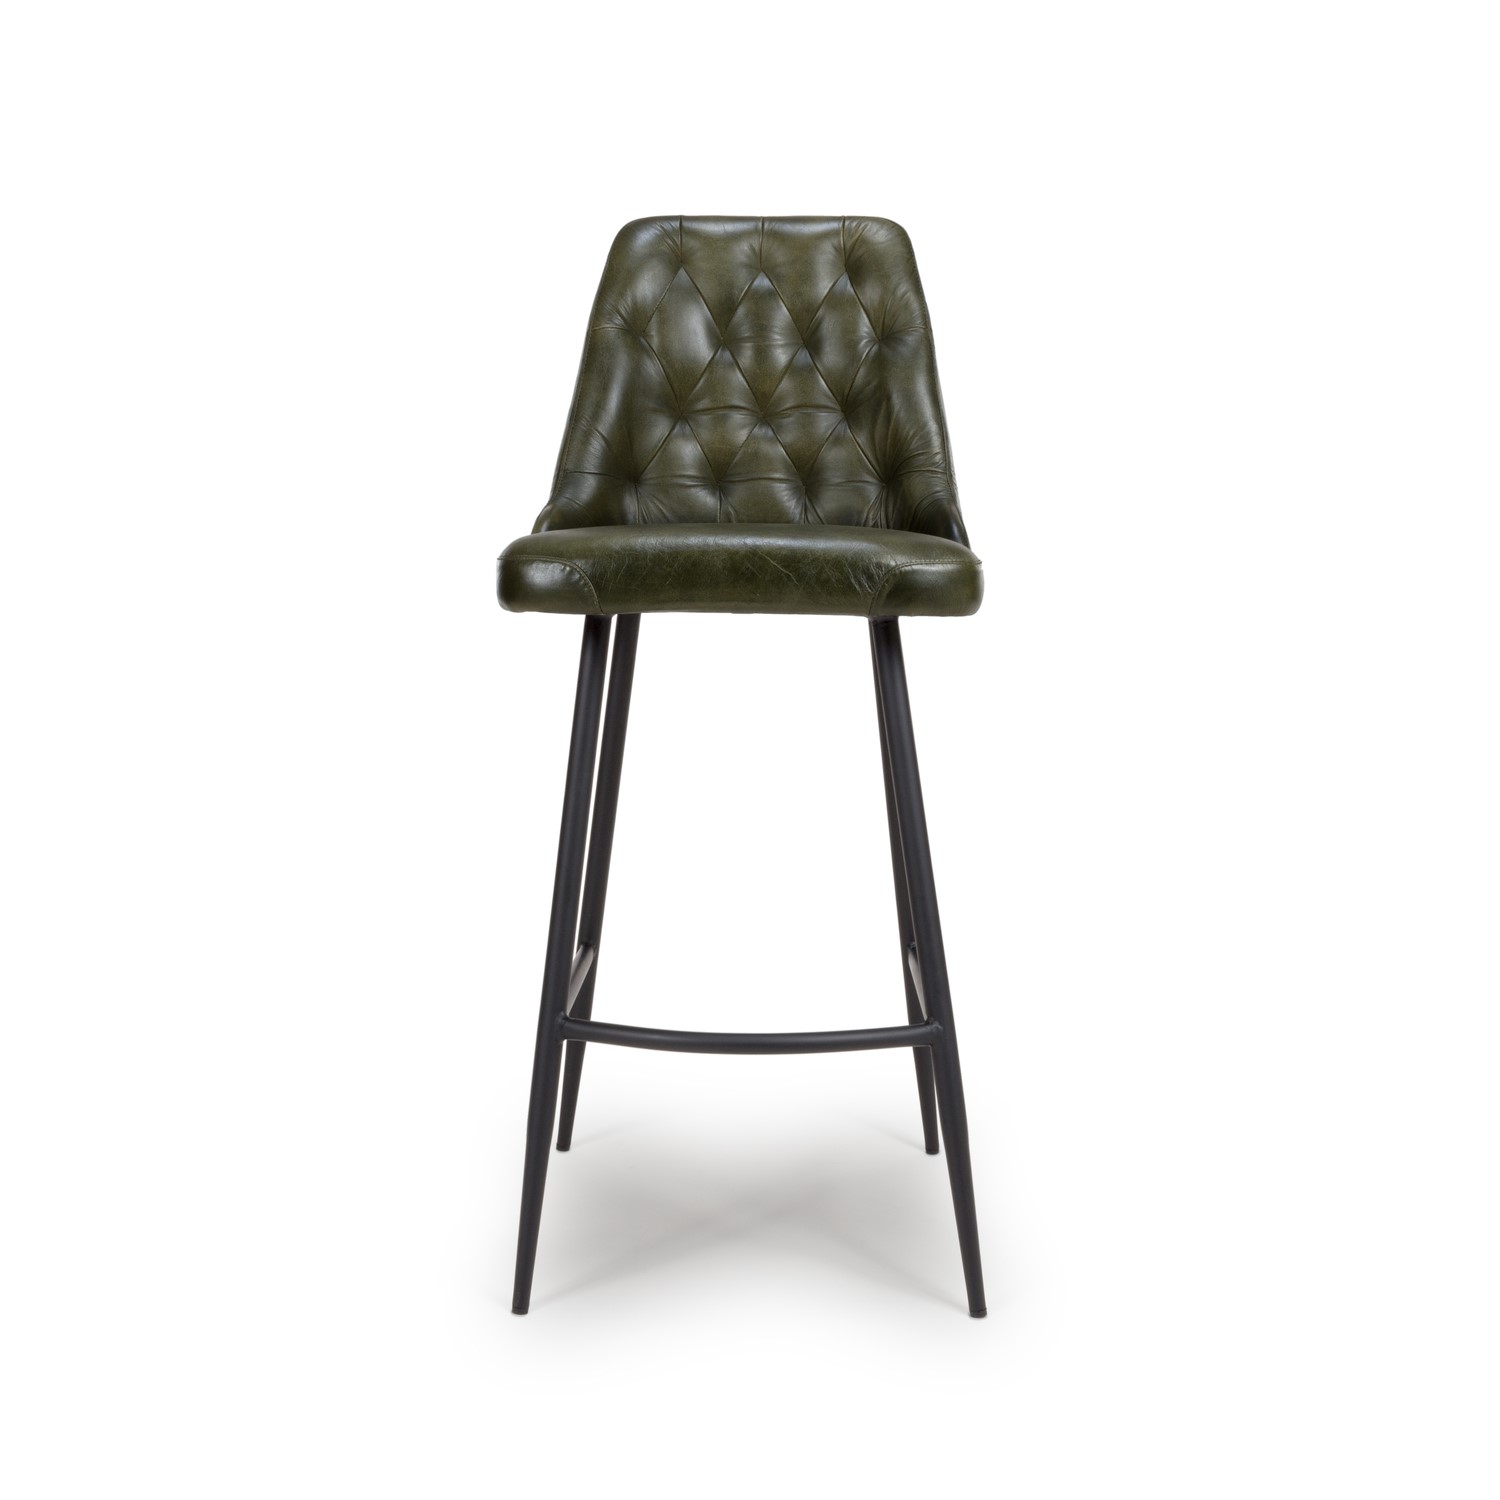 Read more about Set of 2 leather green kitchen stools with quilted back- jaxson